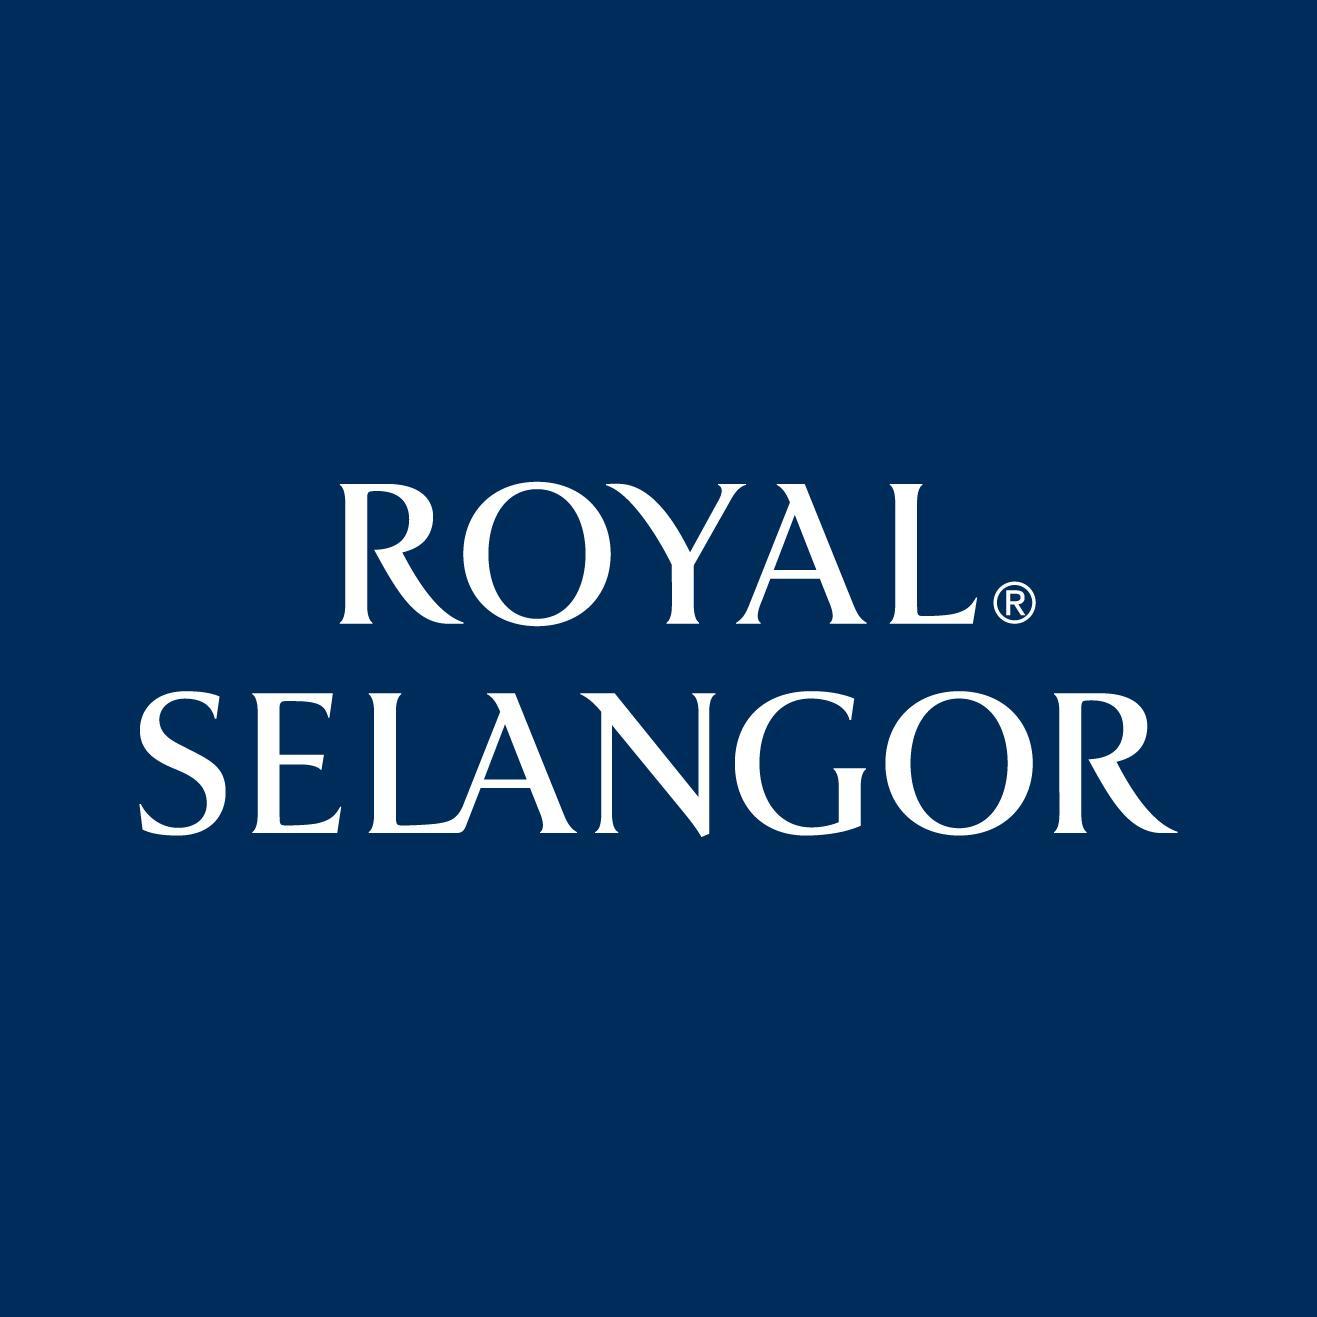 Since 1885, design and craftsmanship have defined Royal Selangor, the world's foremost name in quality pewter gifts and home accessories.